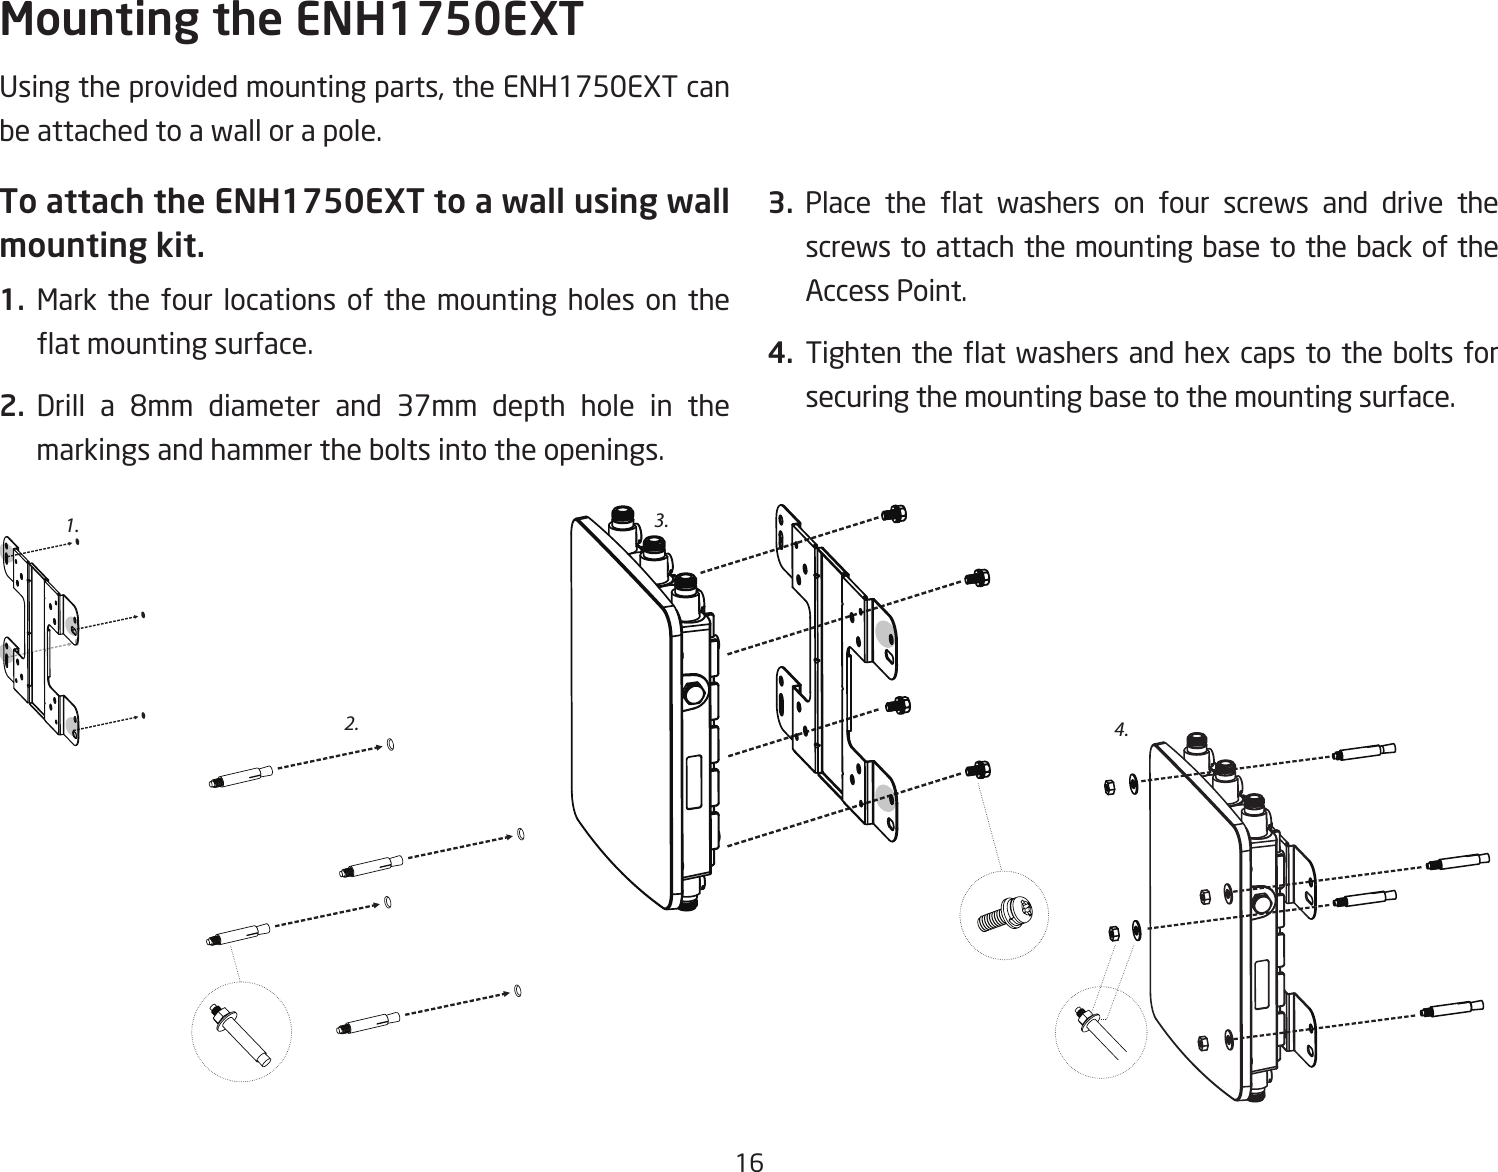 16Usingtheprovidedmountingparts,theENH1750EXTcanbe attached to a wall or a pole.To attach the ENH1750EXT to a wall using wall mounting kit.1.  Mark the four locations of the mounting holes on the atmountingsurface.2. Drill a 8mm diameter and 37mm depth hole in themarkings and hammer the bolts into the openings.3. Place the at washers on four screws and drive thescrews to attach the mounting base to the back of the Access Point.4. Tightentheat washersandhexcaps totheboltsforsecuring the mounting base to the mounting surface.Mounting the ENH1750EXT2.3.4.1.